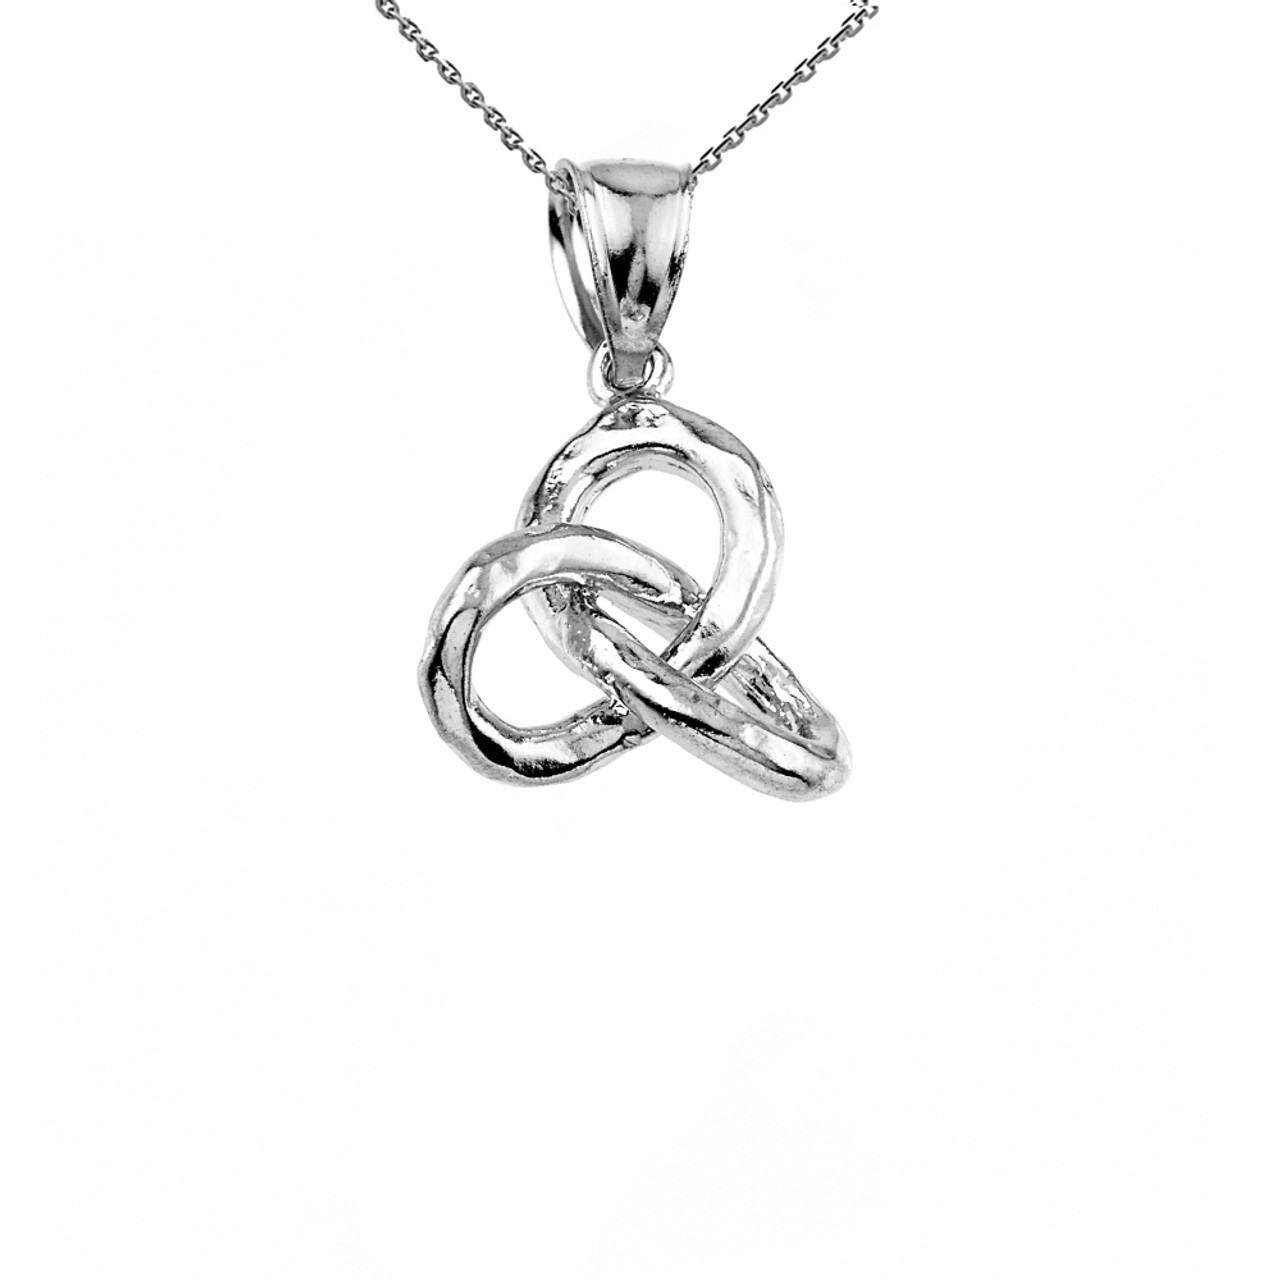 Find Online Sterling Silver Celtic Knot Pendant - J.H. Breakell and Co.